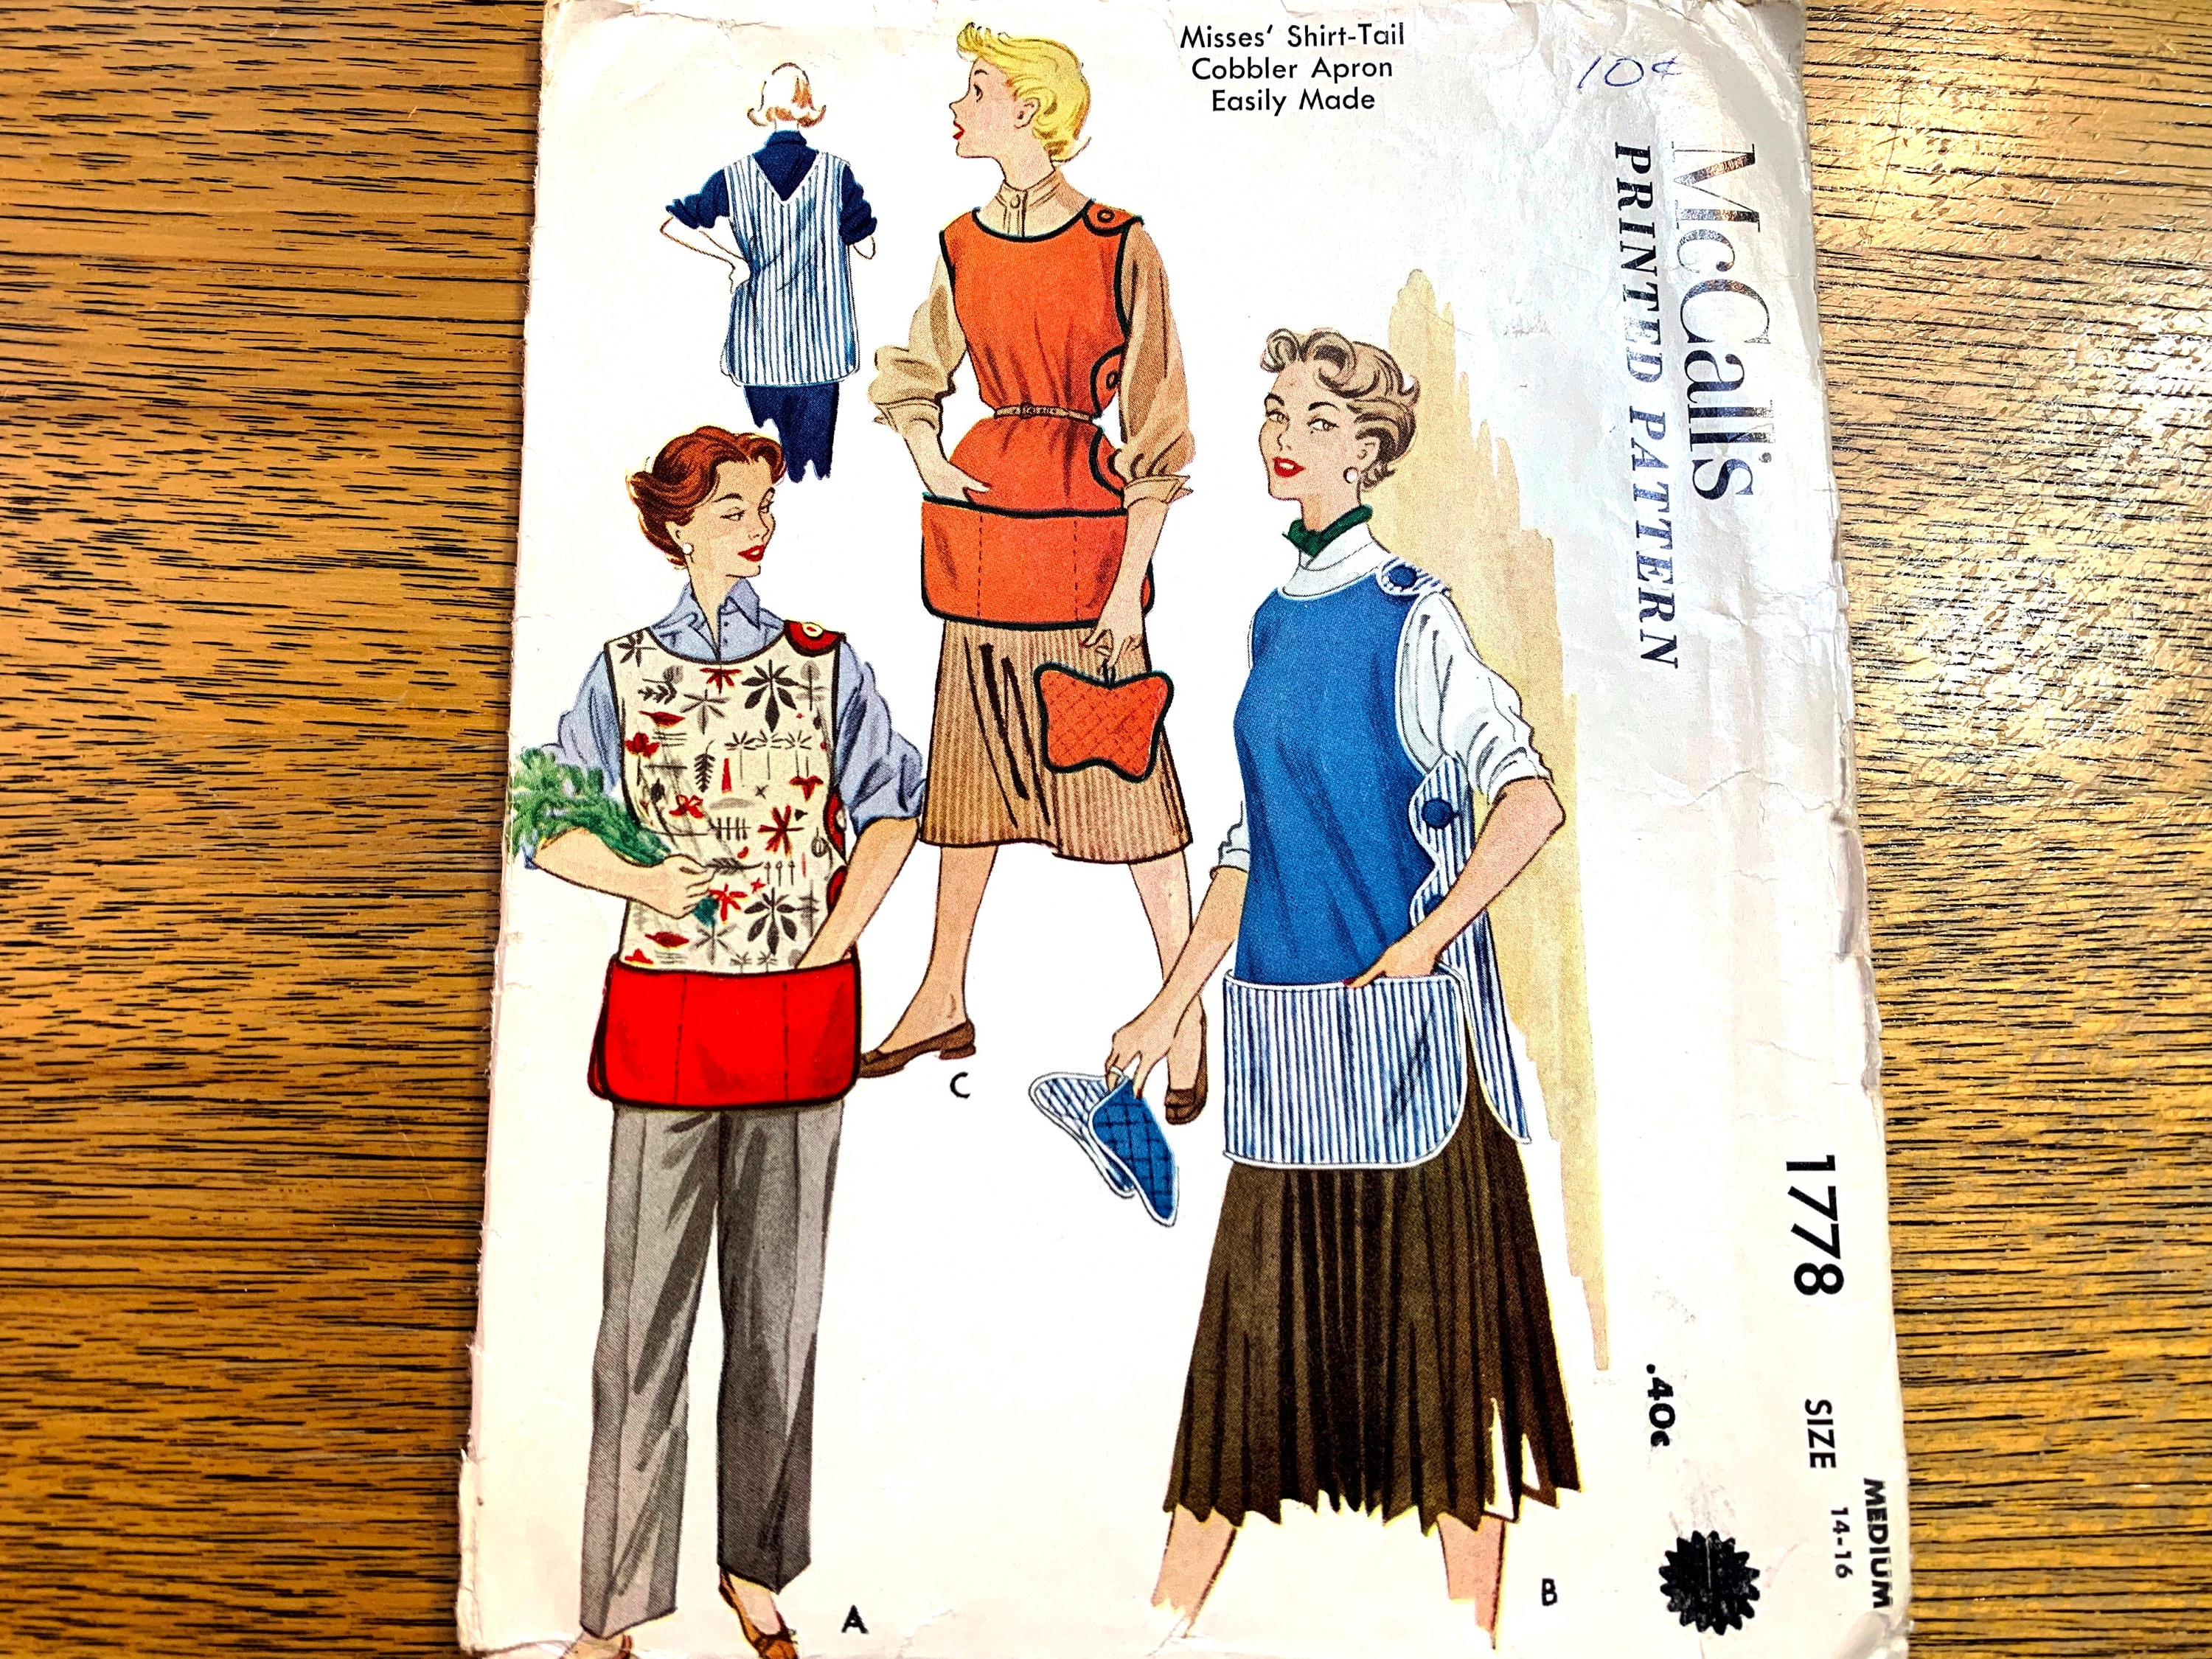  Simplicity 1950's Vintage Fashion Women's Apron Sewing Pattern,  Sizes S-L : Arts, Crafts & Sewing